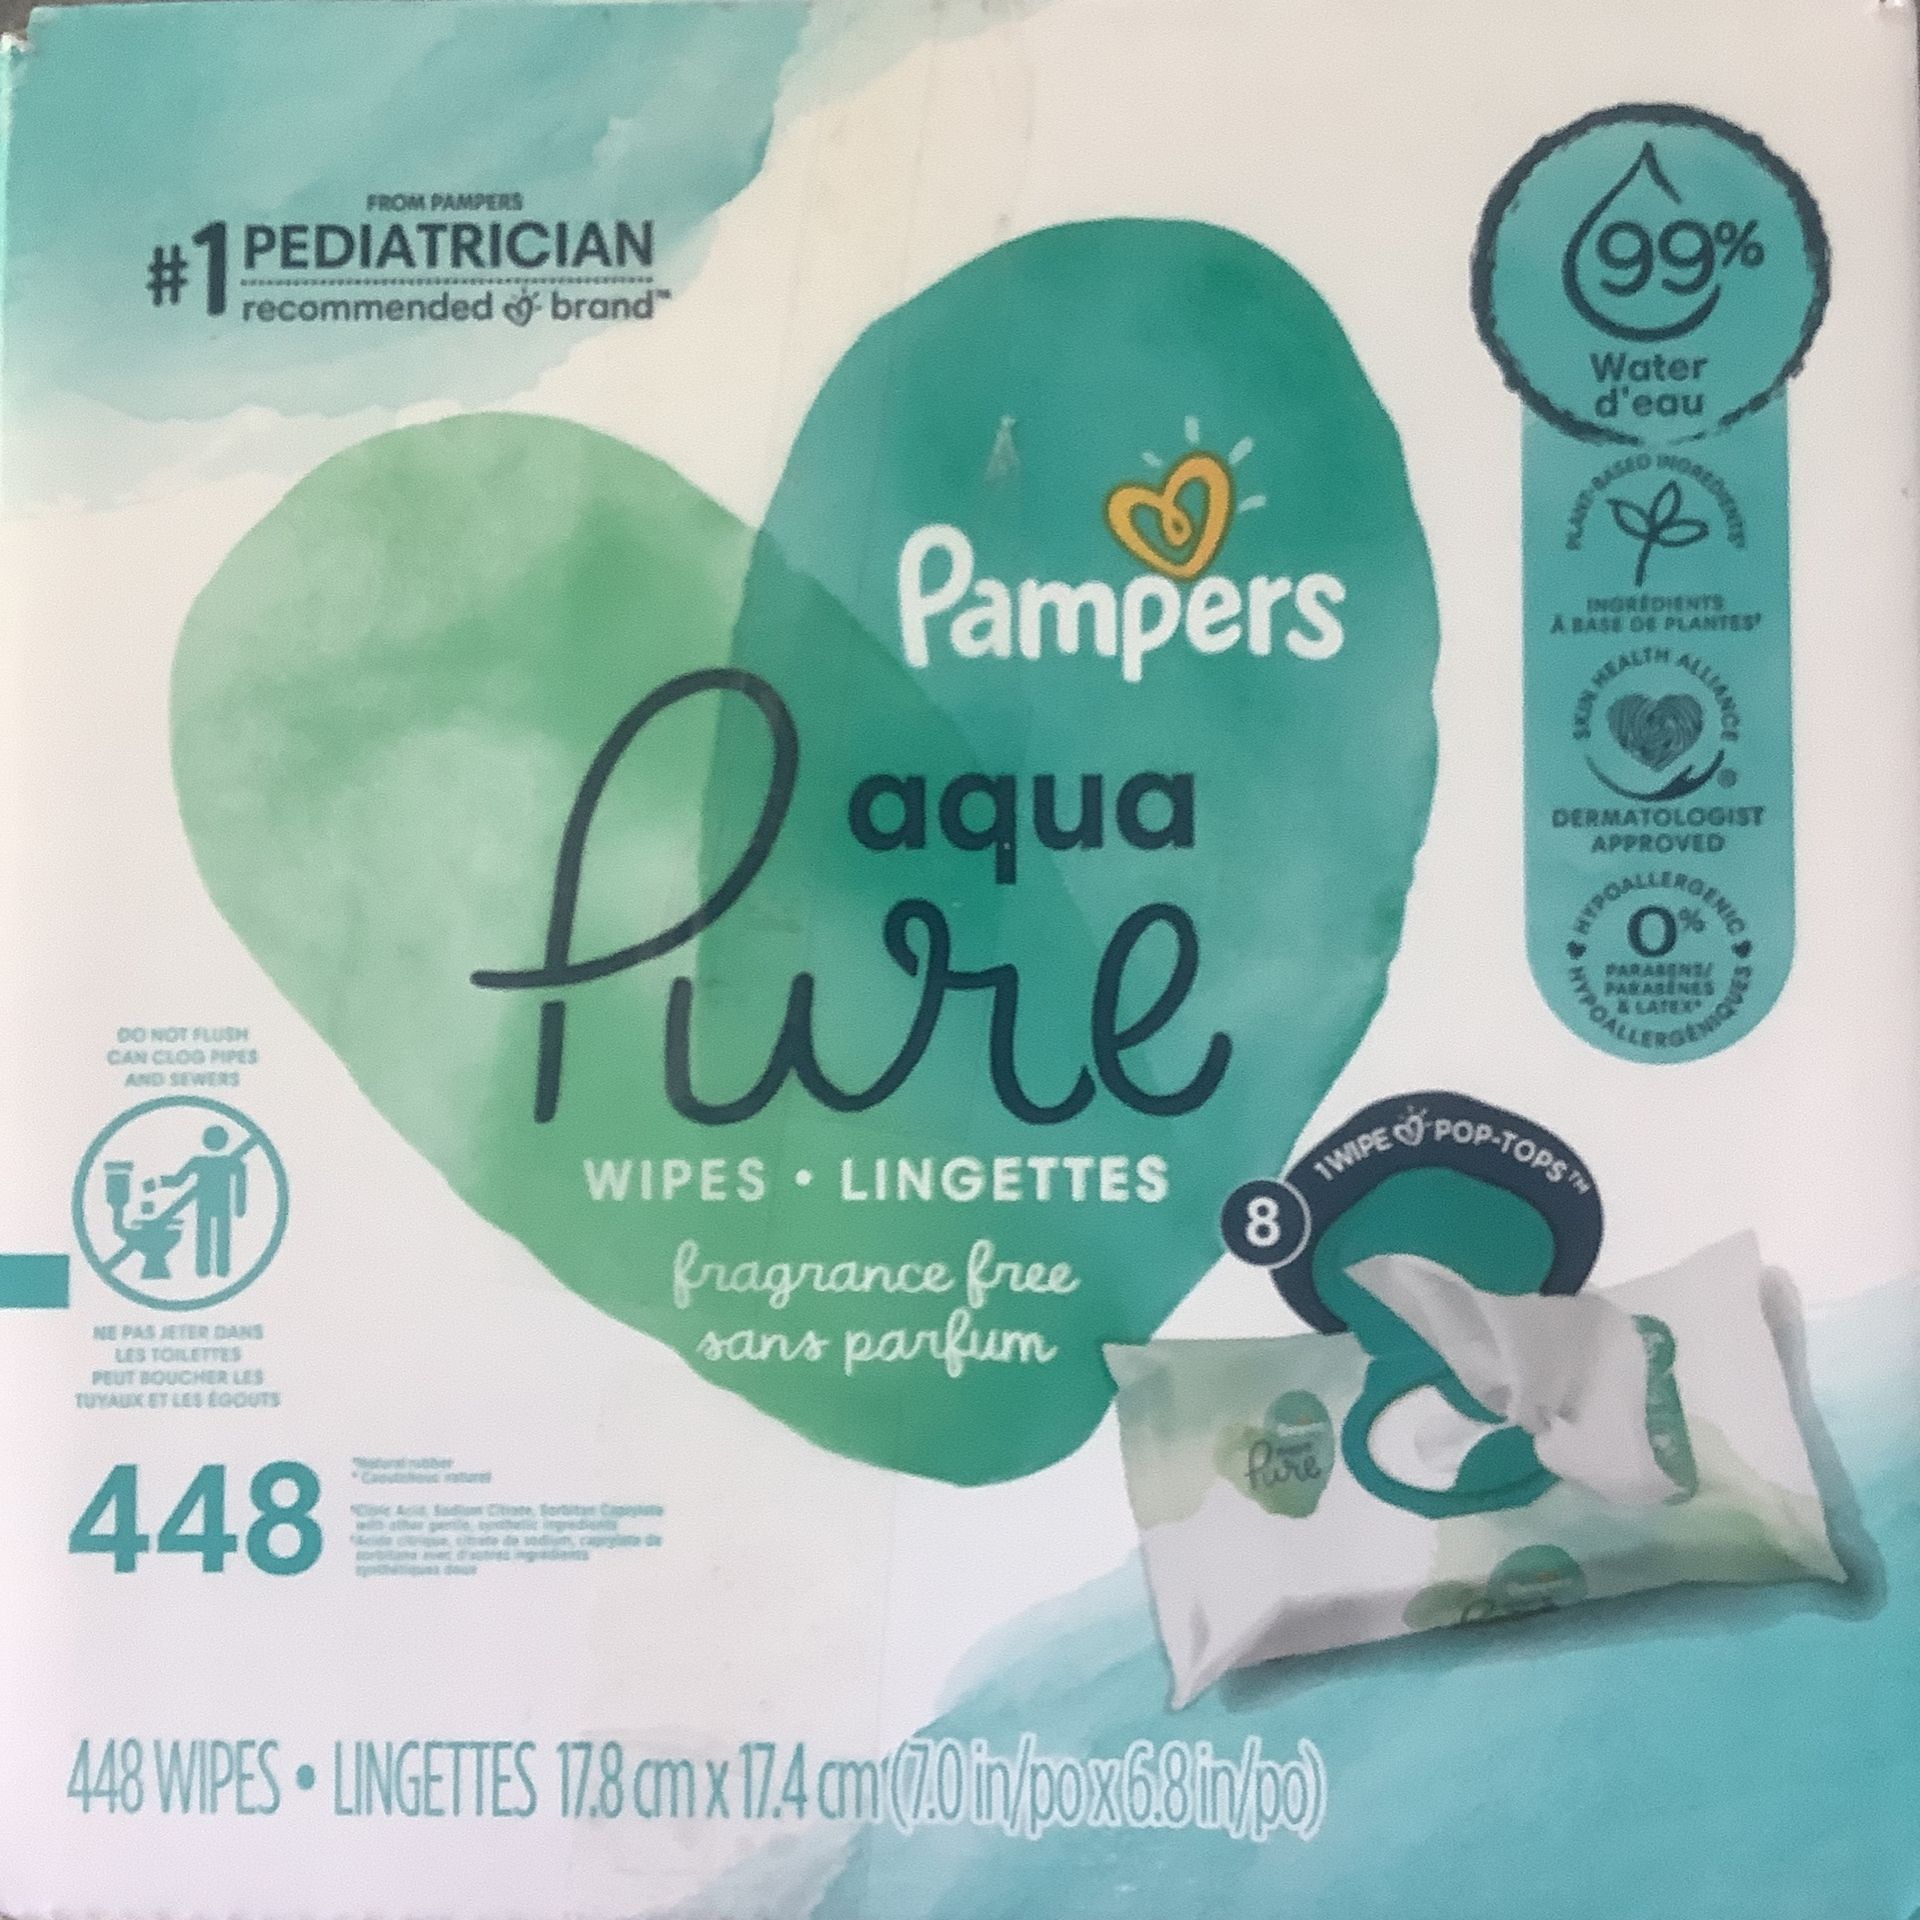 Pampers Aqua Pure Wipes 448 Count $18